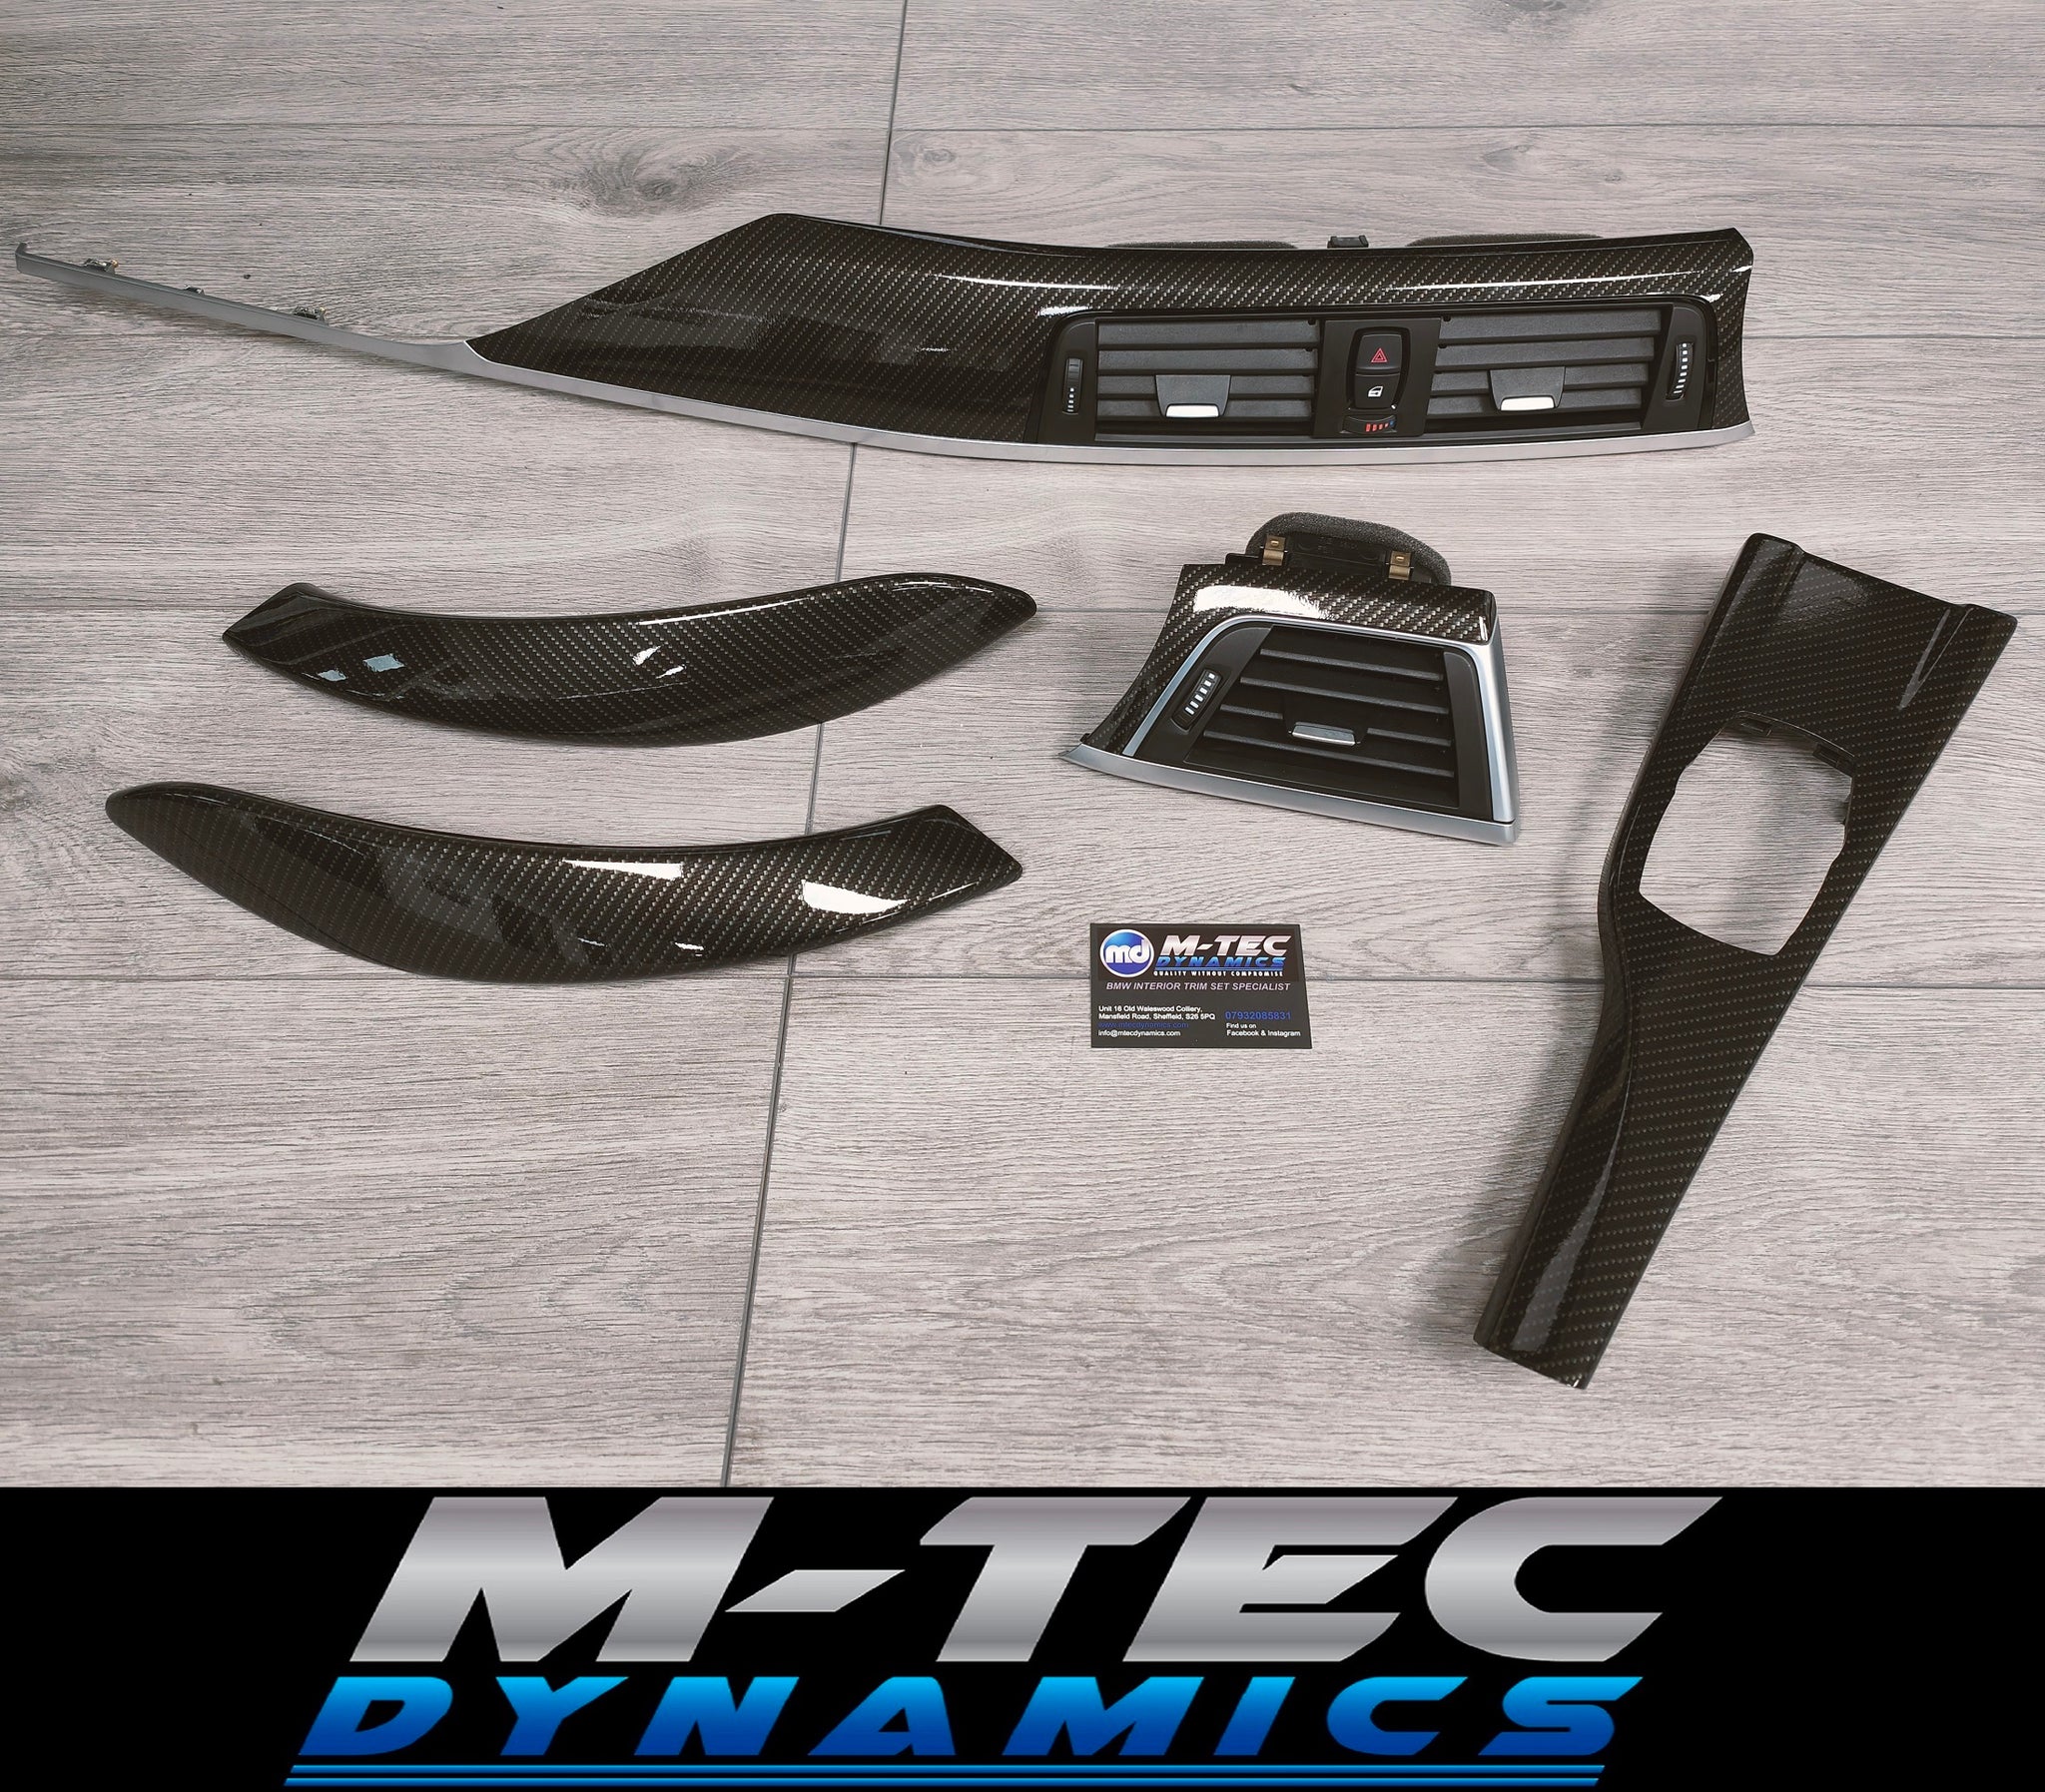 BMW F32 F82 4-SERIES COUPE INTERIOR TRIM SET - HIGH GLOSS CARBON / SILVER ACCENT (MTD-HG)